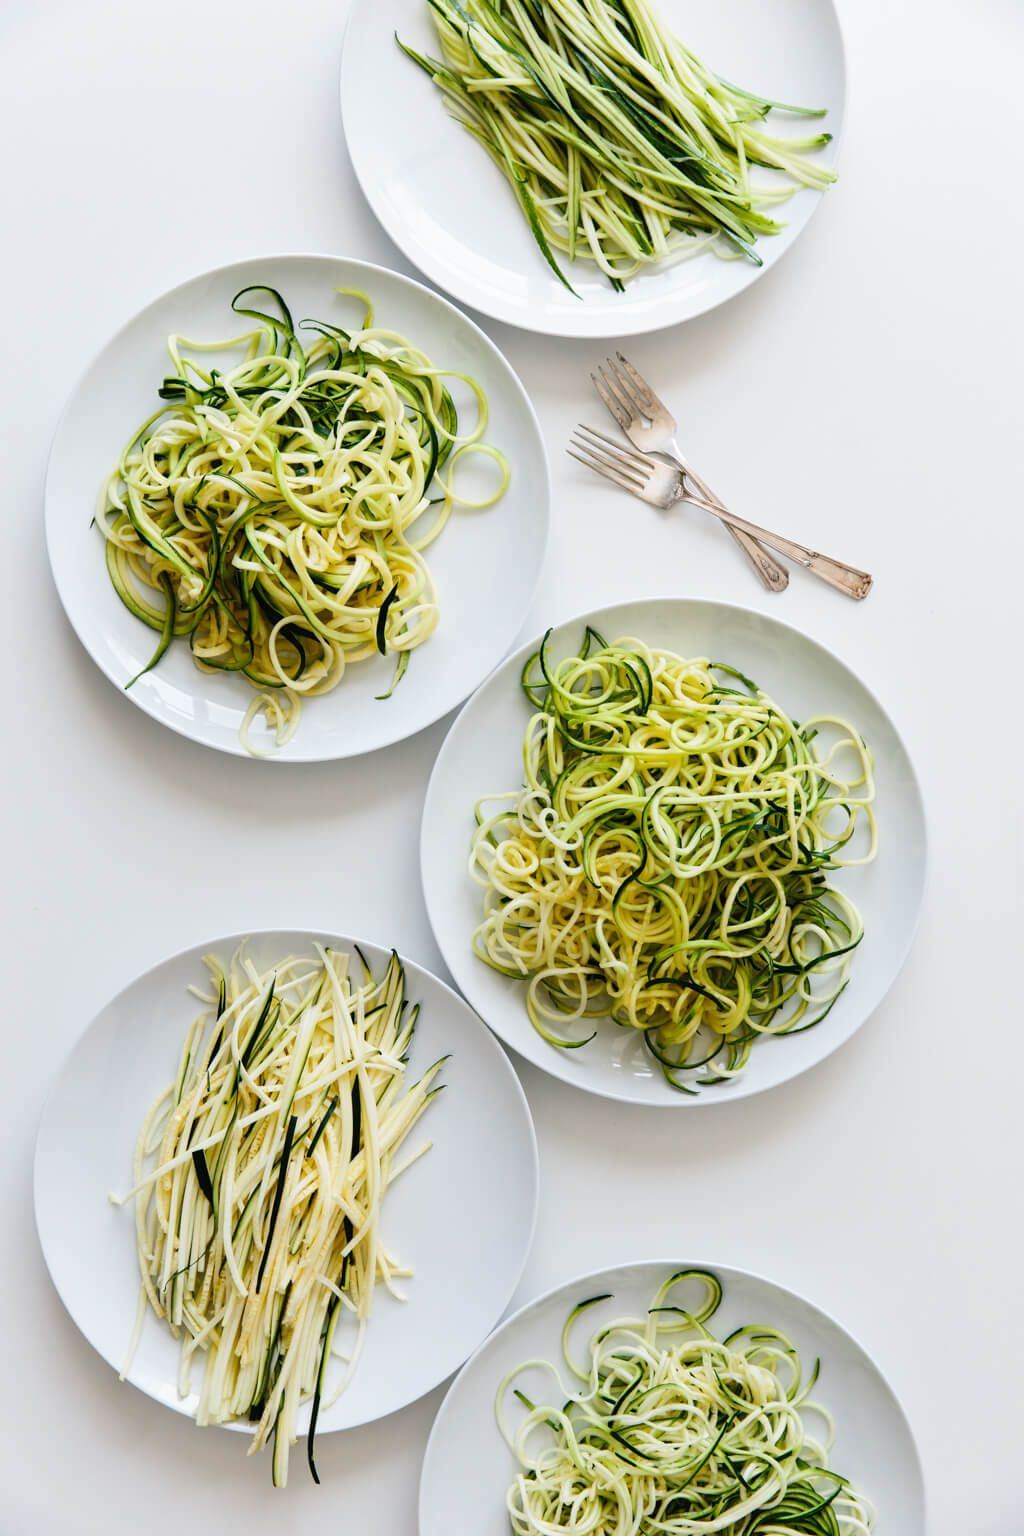 Five plates of zucchini noodles made by different methods.